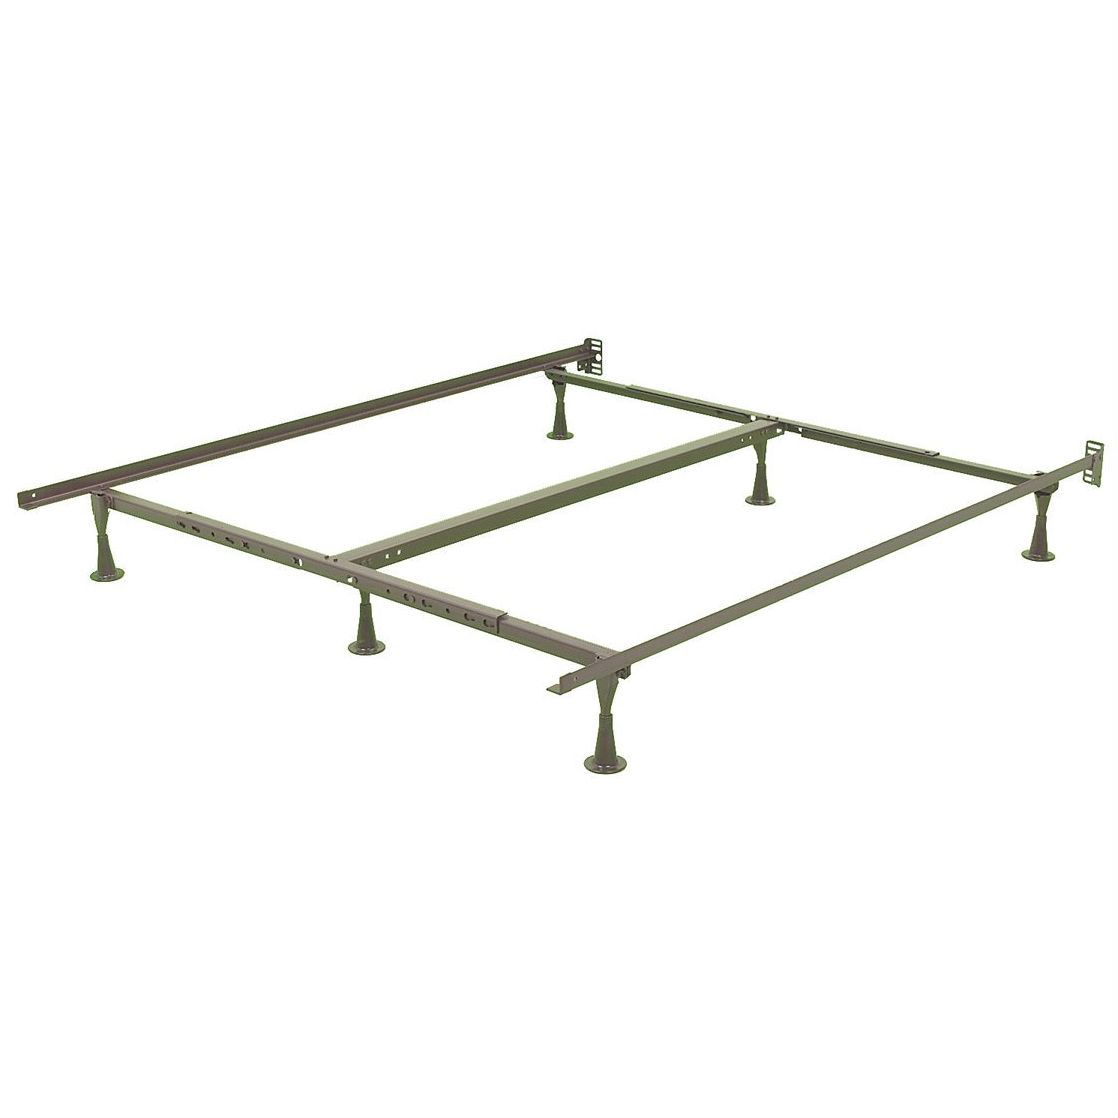 King size 6-Leg Sturdy Metal Bed Fame with Glides and Headboard Brackets